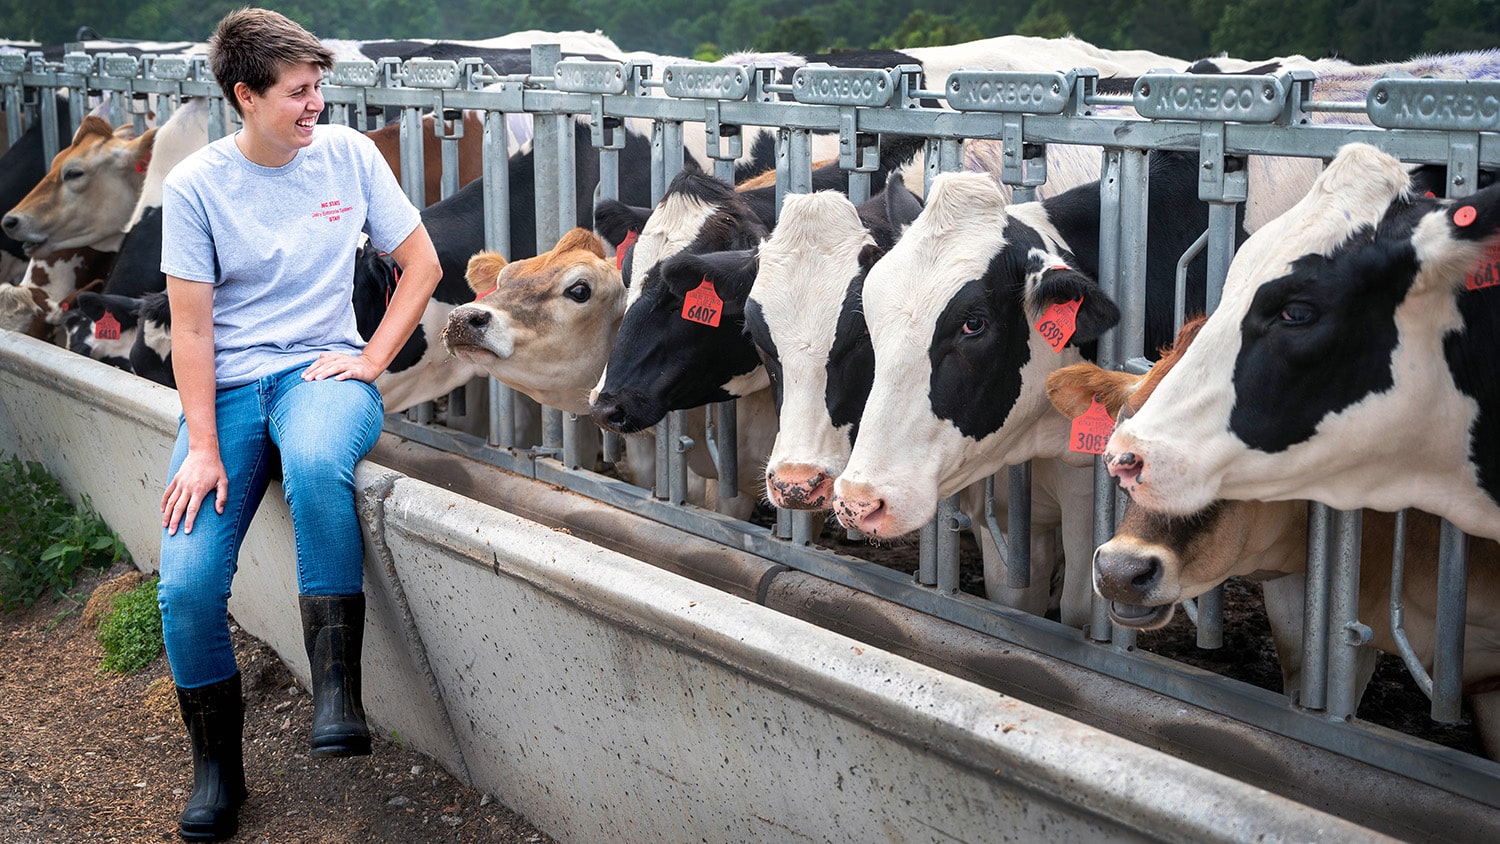 Caroline VandeBerg with the cows on the farm